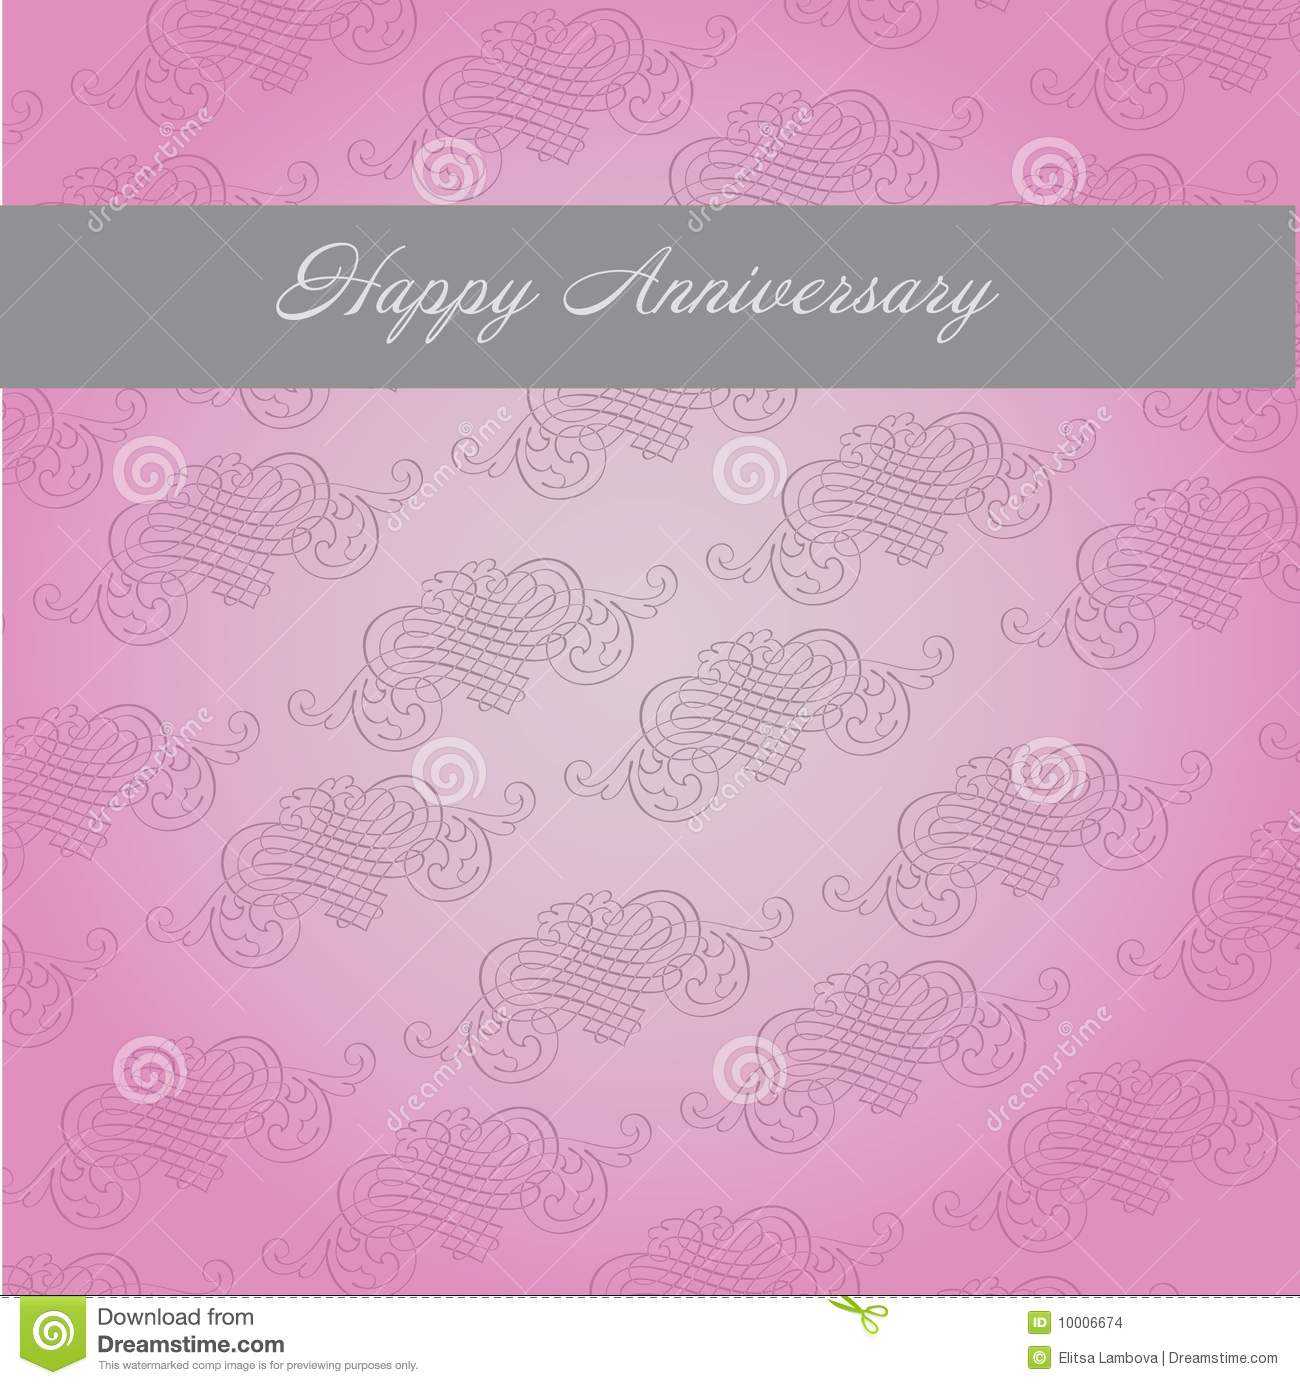 Anniversary Template Stock Vector. Illustration Of Greeting With Template For Anniversary Card